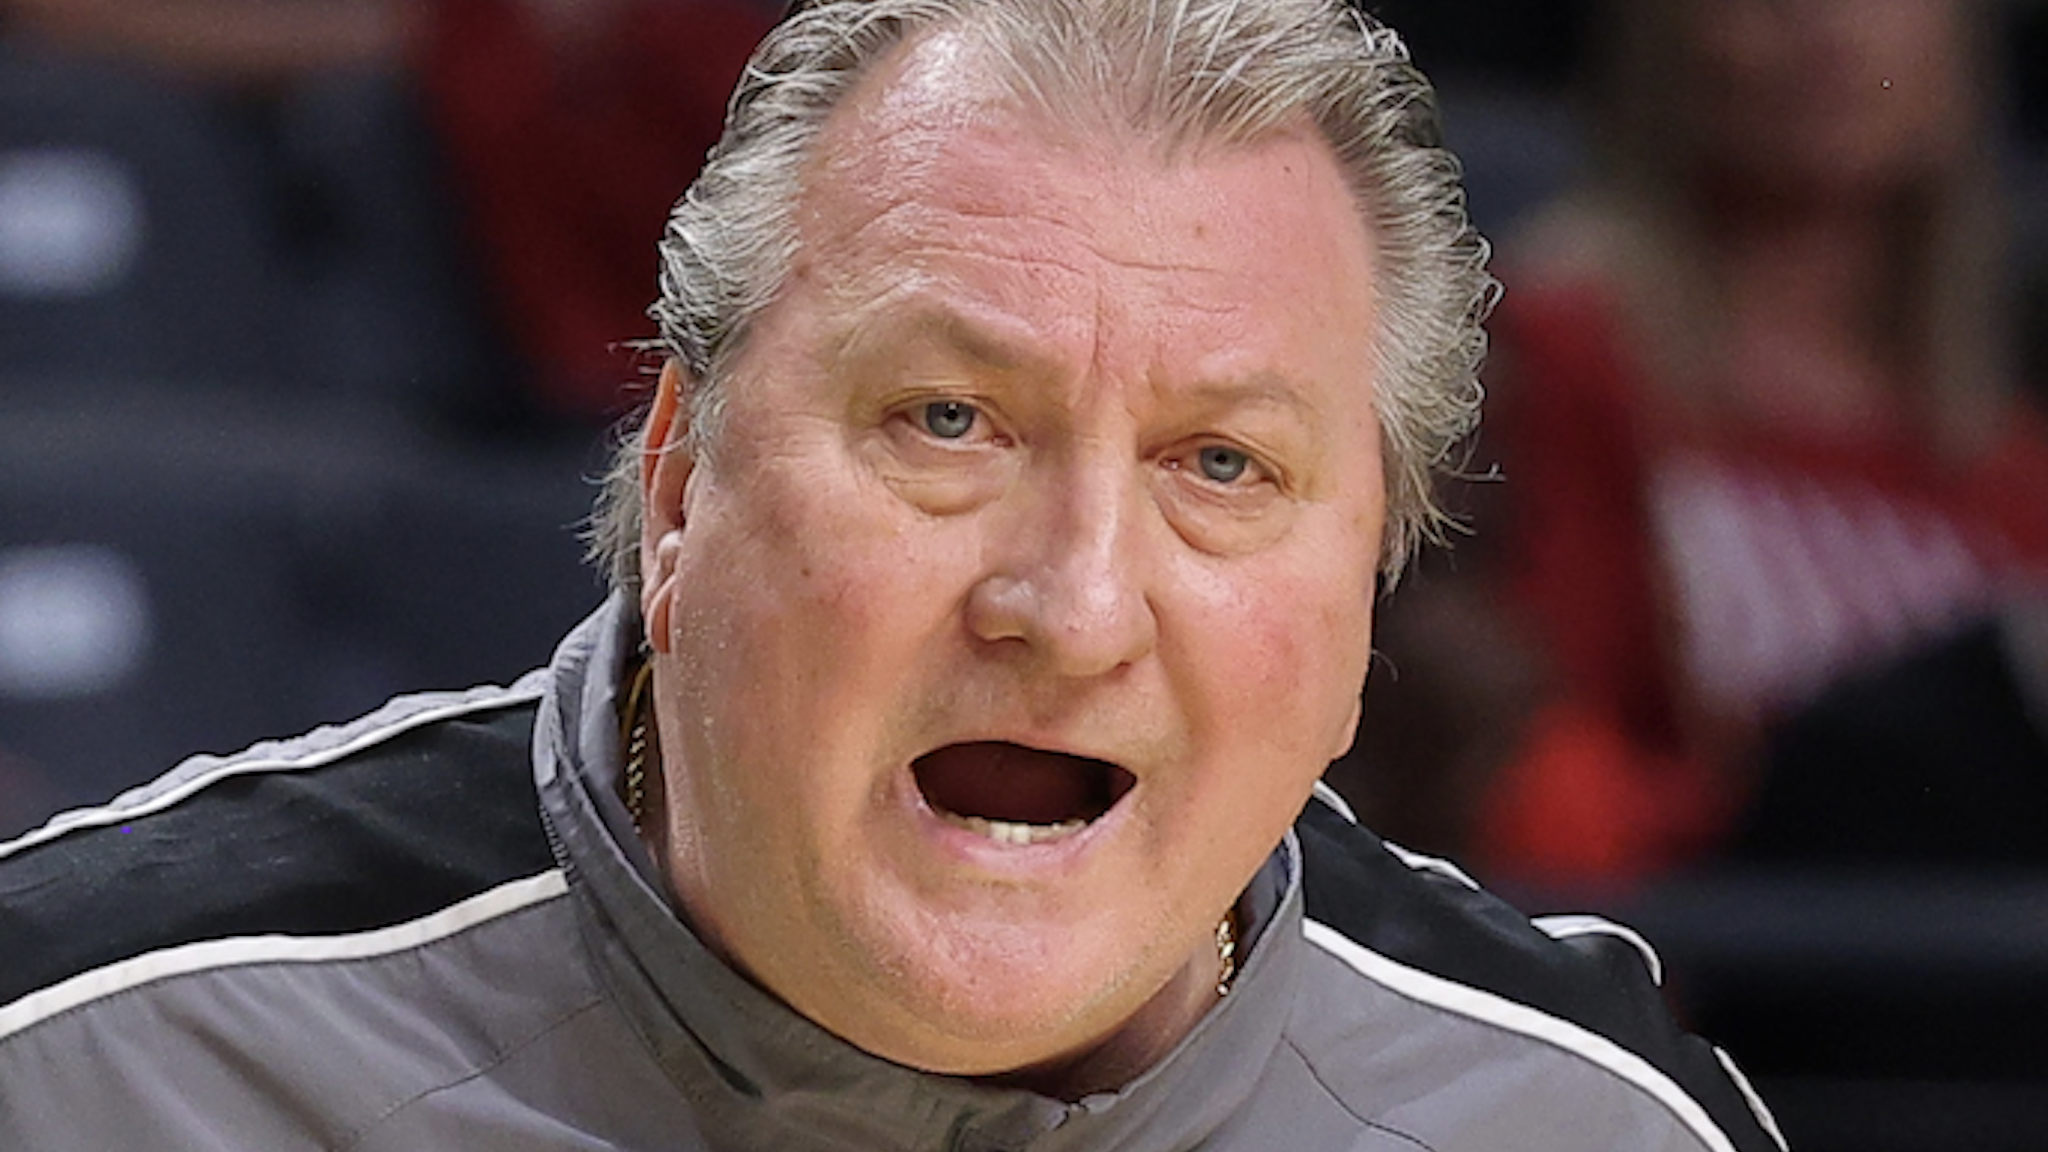 Huggins, 69, was being interviewed by Cincinnati radio host Bill Cunningham on WLW when he was asked about an incident in which Xavier fans threw sex toys onto the floor during a game against University of Cincinnati back when Huggins coached the Bearcats.